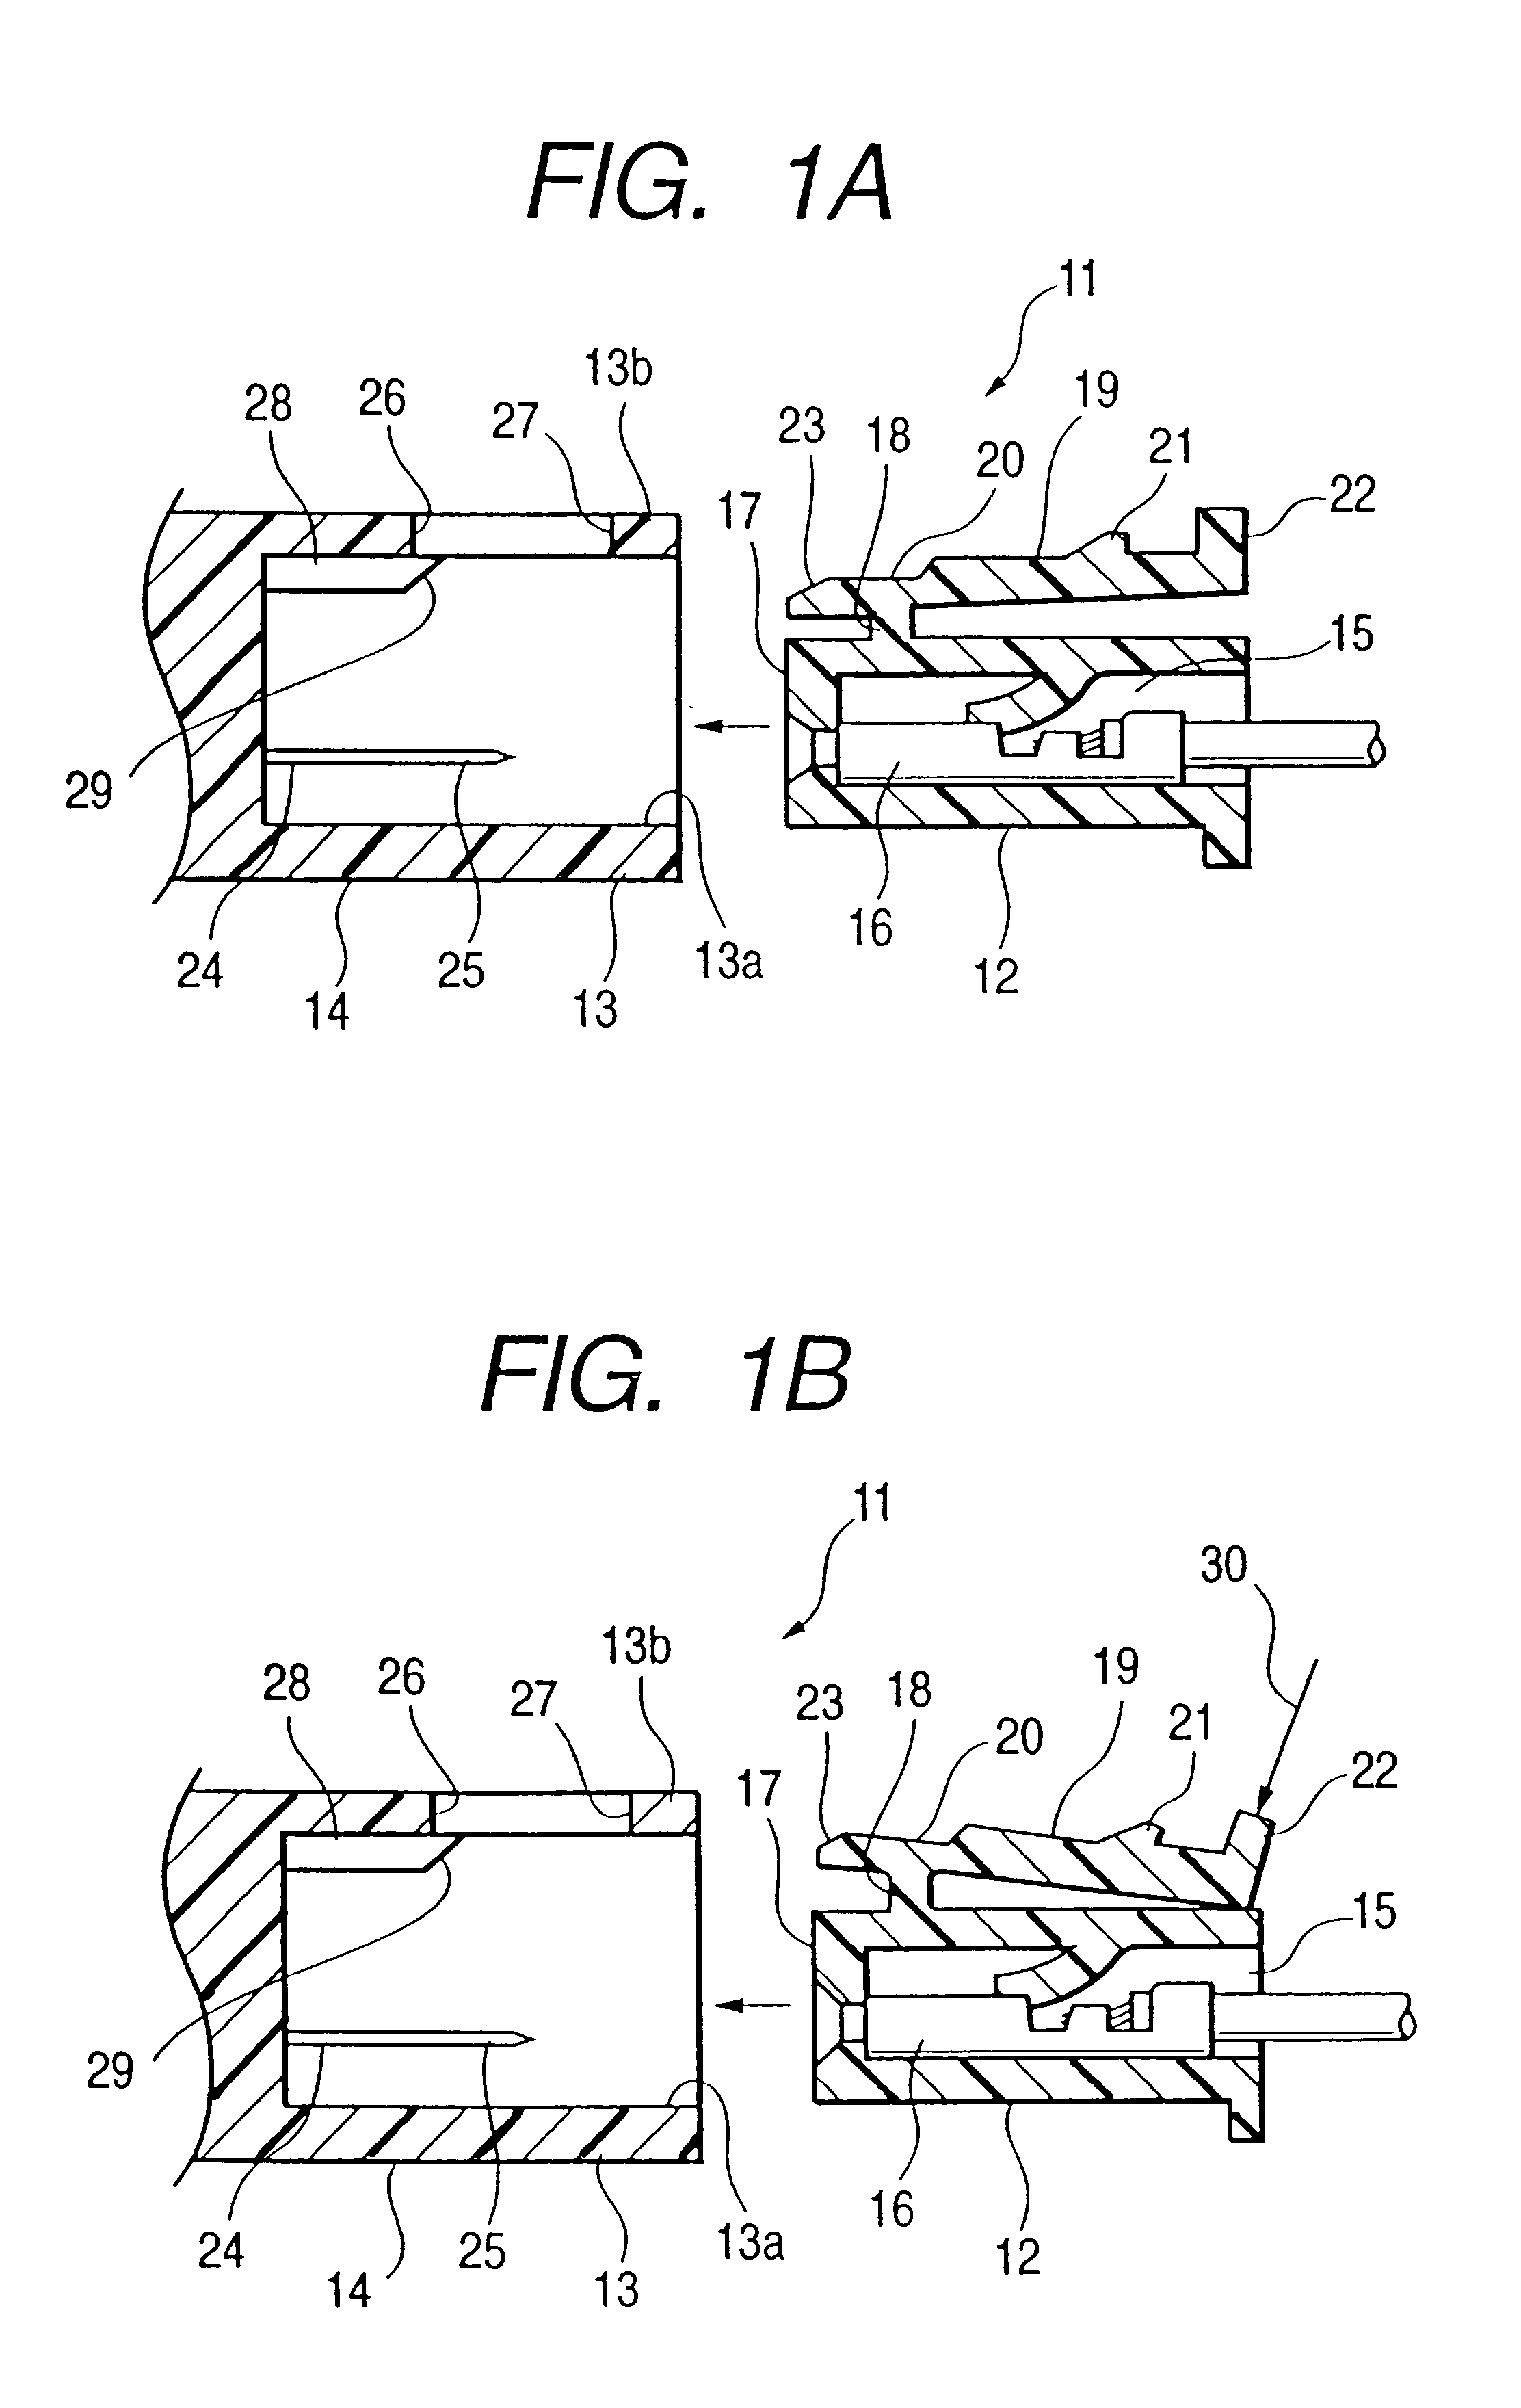 Lock structure for locking male and female connector housings together